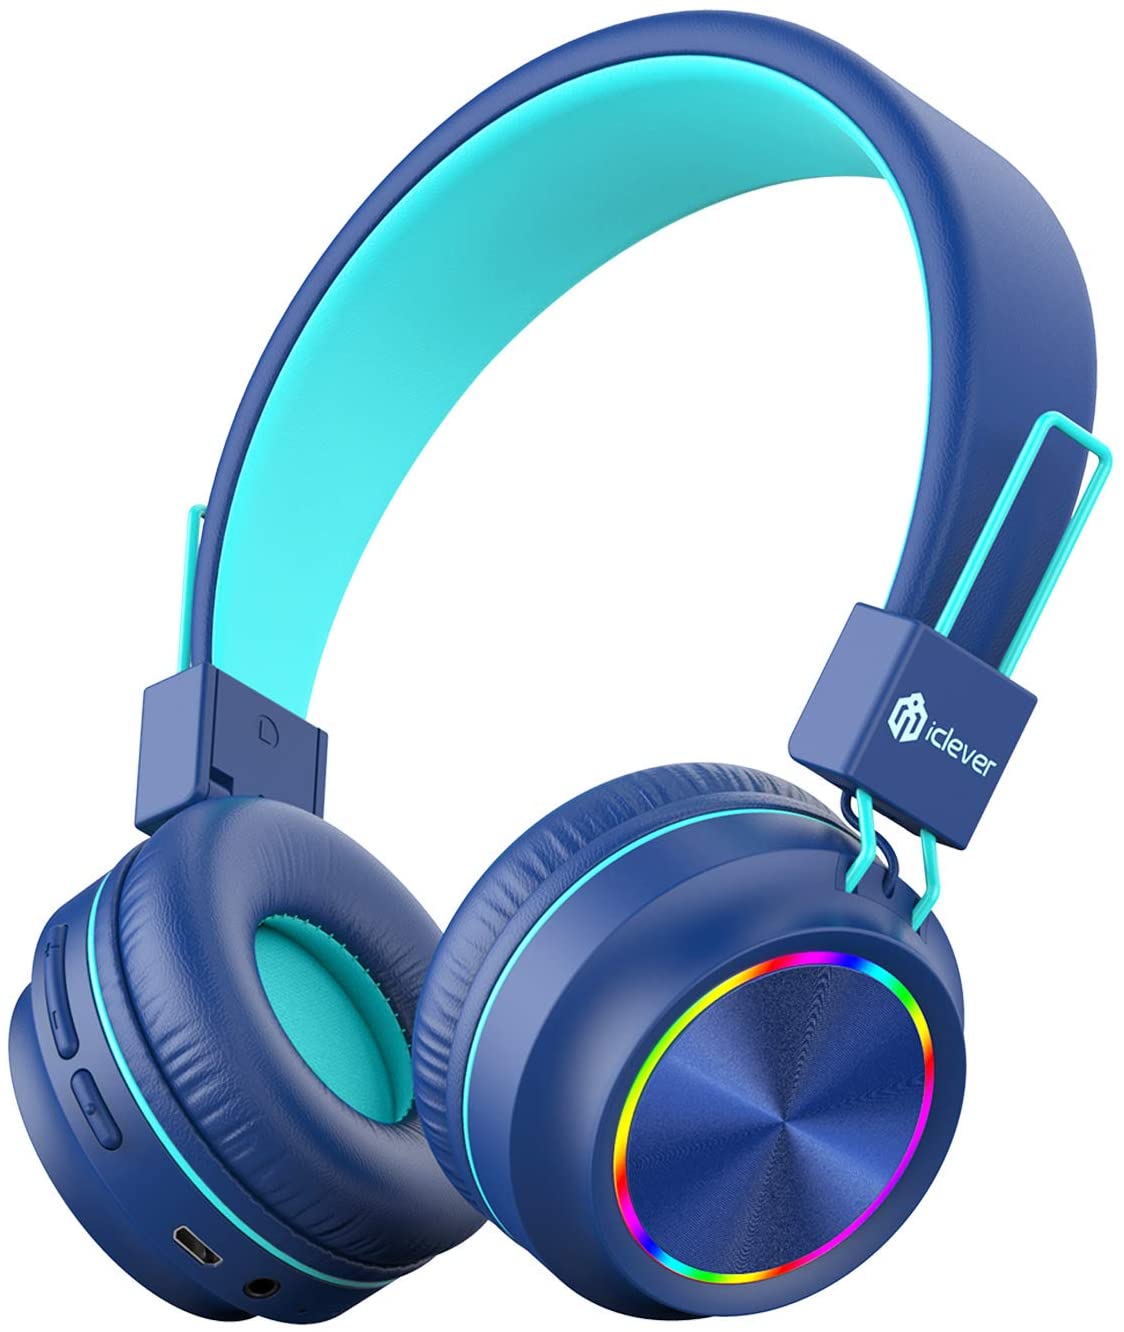 iClever BTH03 Kids Headphones, Colorful LED Lights Kids Wireless Headphones with MIC, 25H Playtime, Stereo Sound, Bluetooth 5.0, Foldable, Childrens Headphones on Ear for Study Tablet Airplane, Blue.